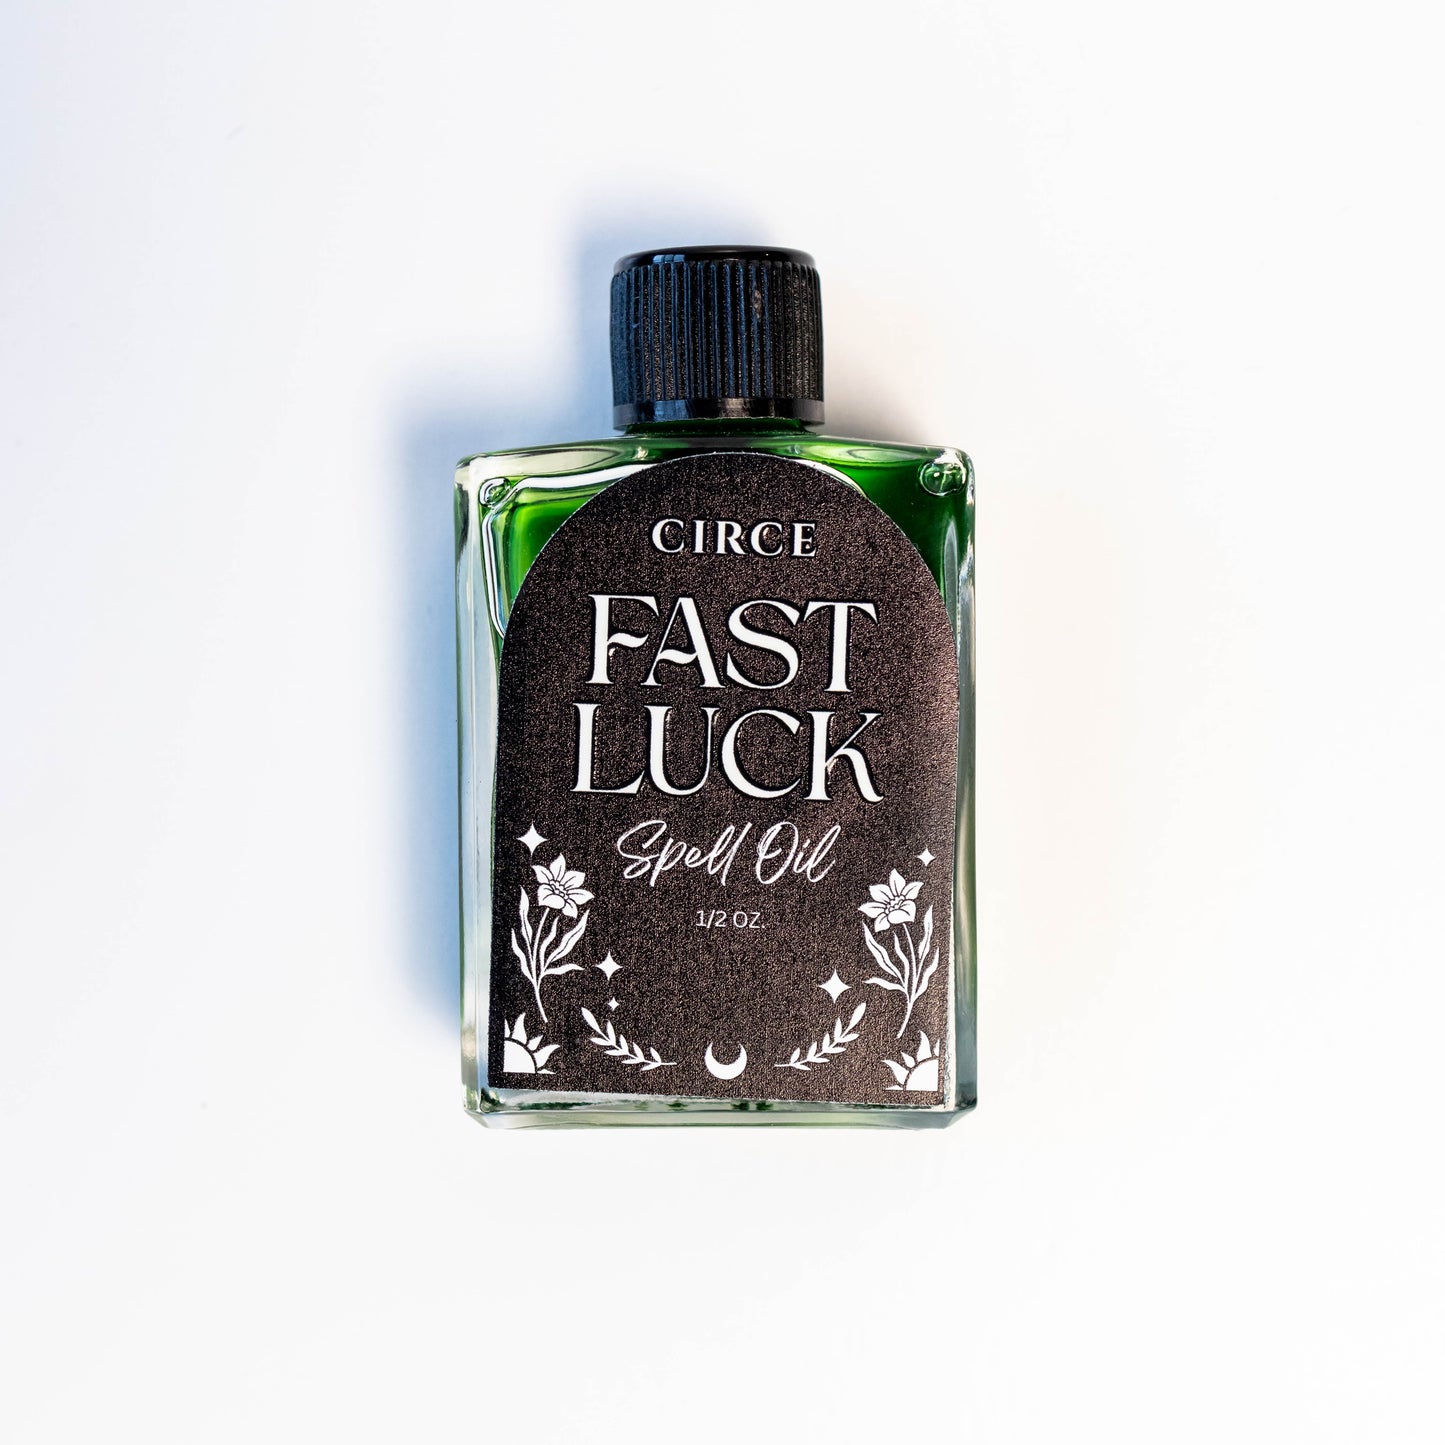 CIRCE Fast Luck Spell OIl 1/2 oz. - Oil Spell Oil from CirceBoutique